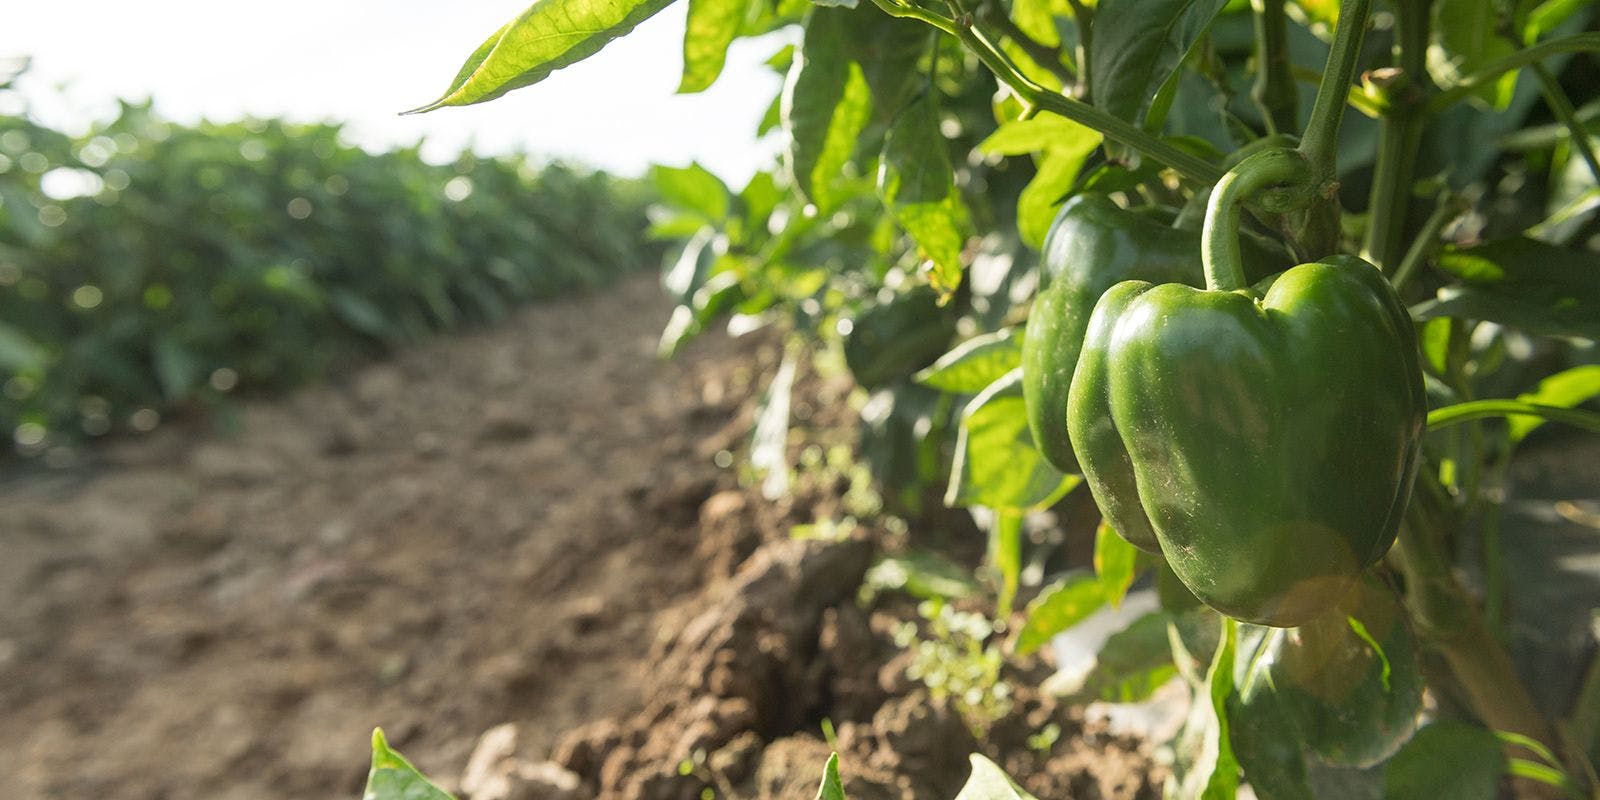 Sun-kissed green bell peppers on Reuben Miller’s Organic Valley produce farm in Wisconsin.